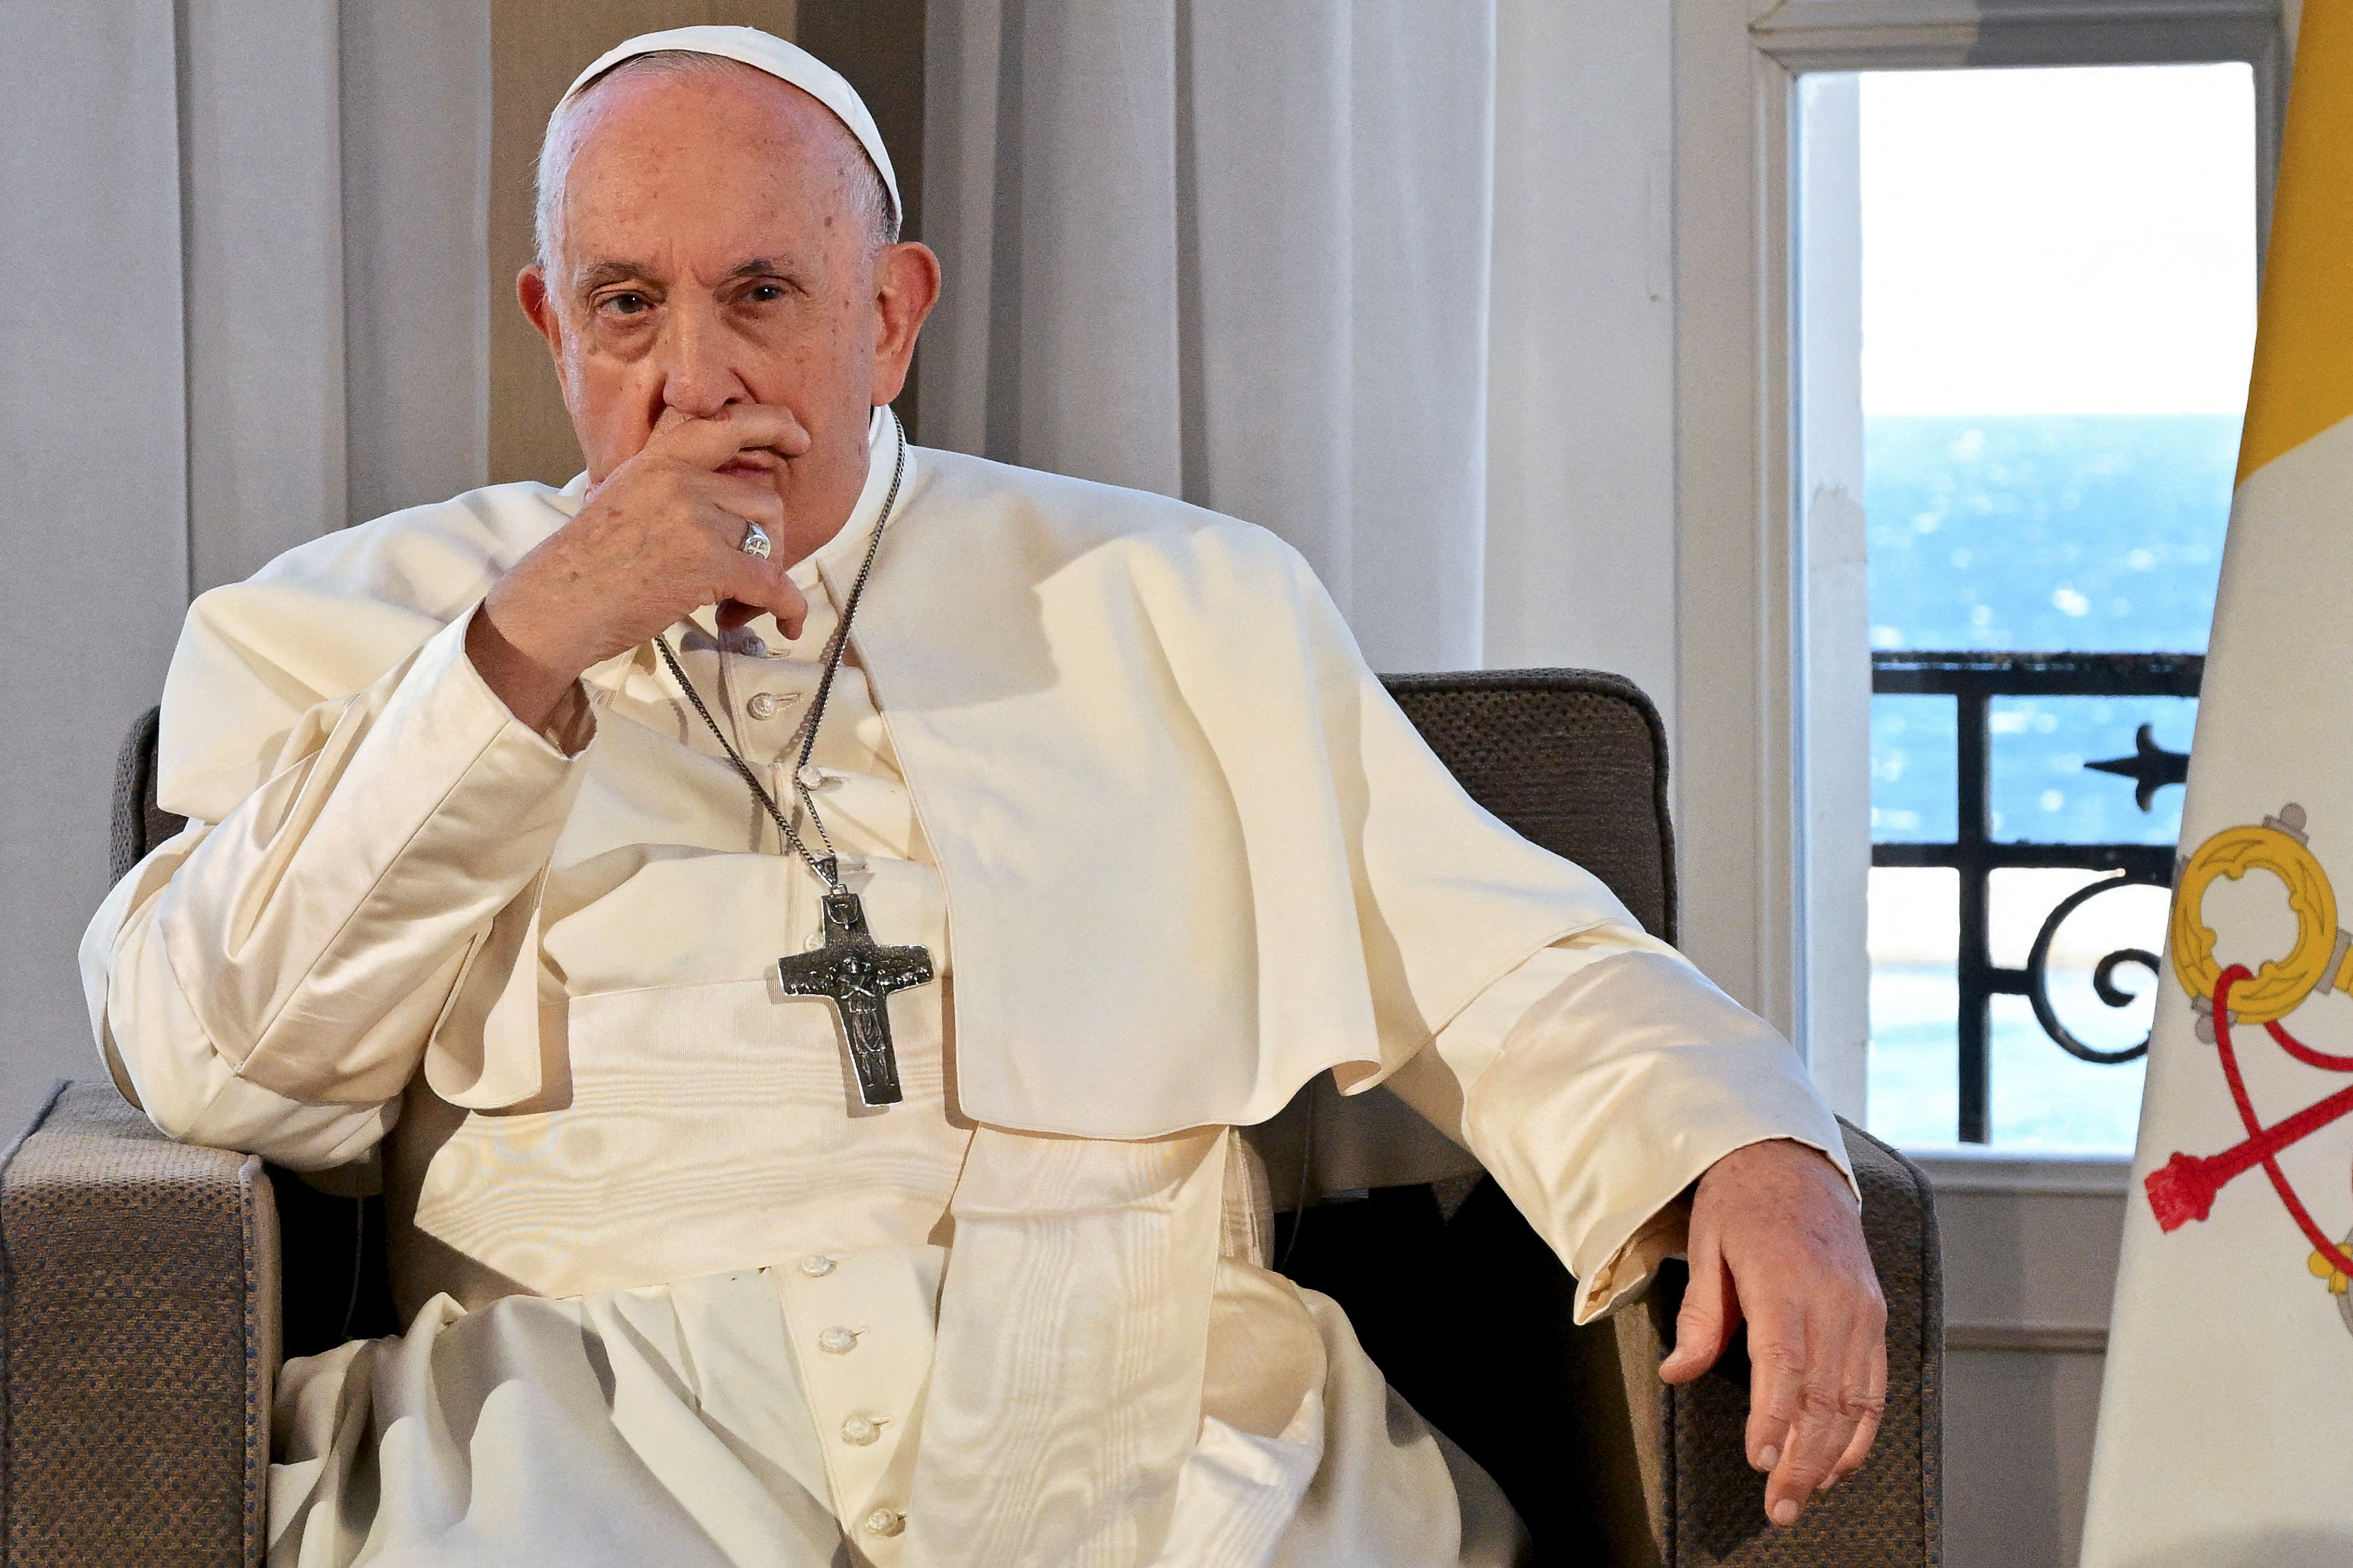 File image: Pope Francis issued the most stern call so far on climate crisis